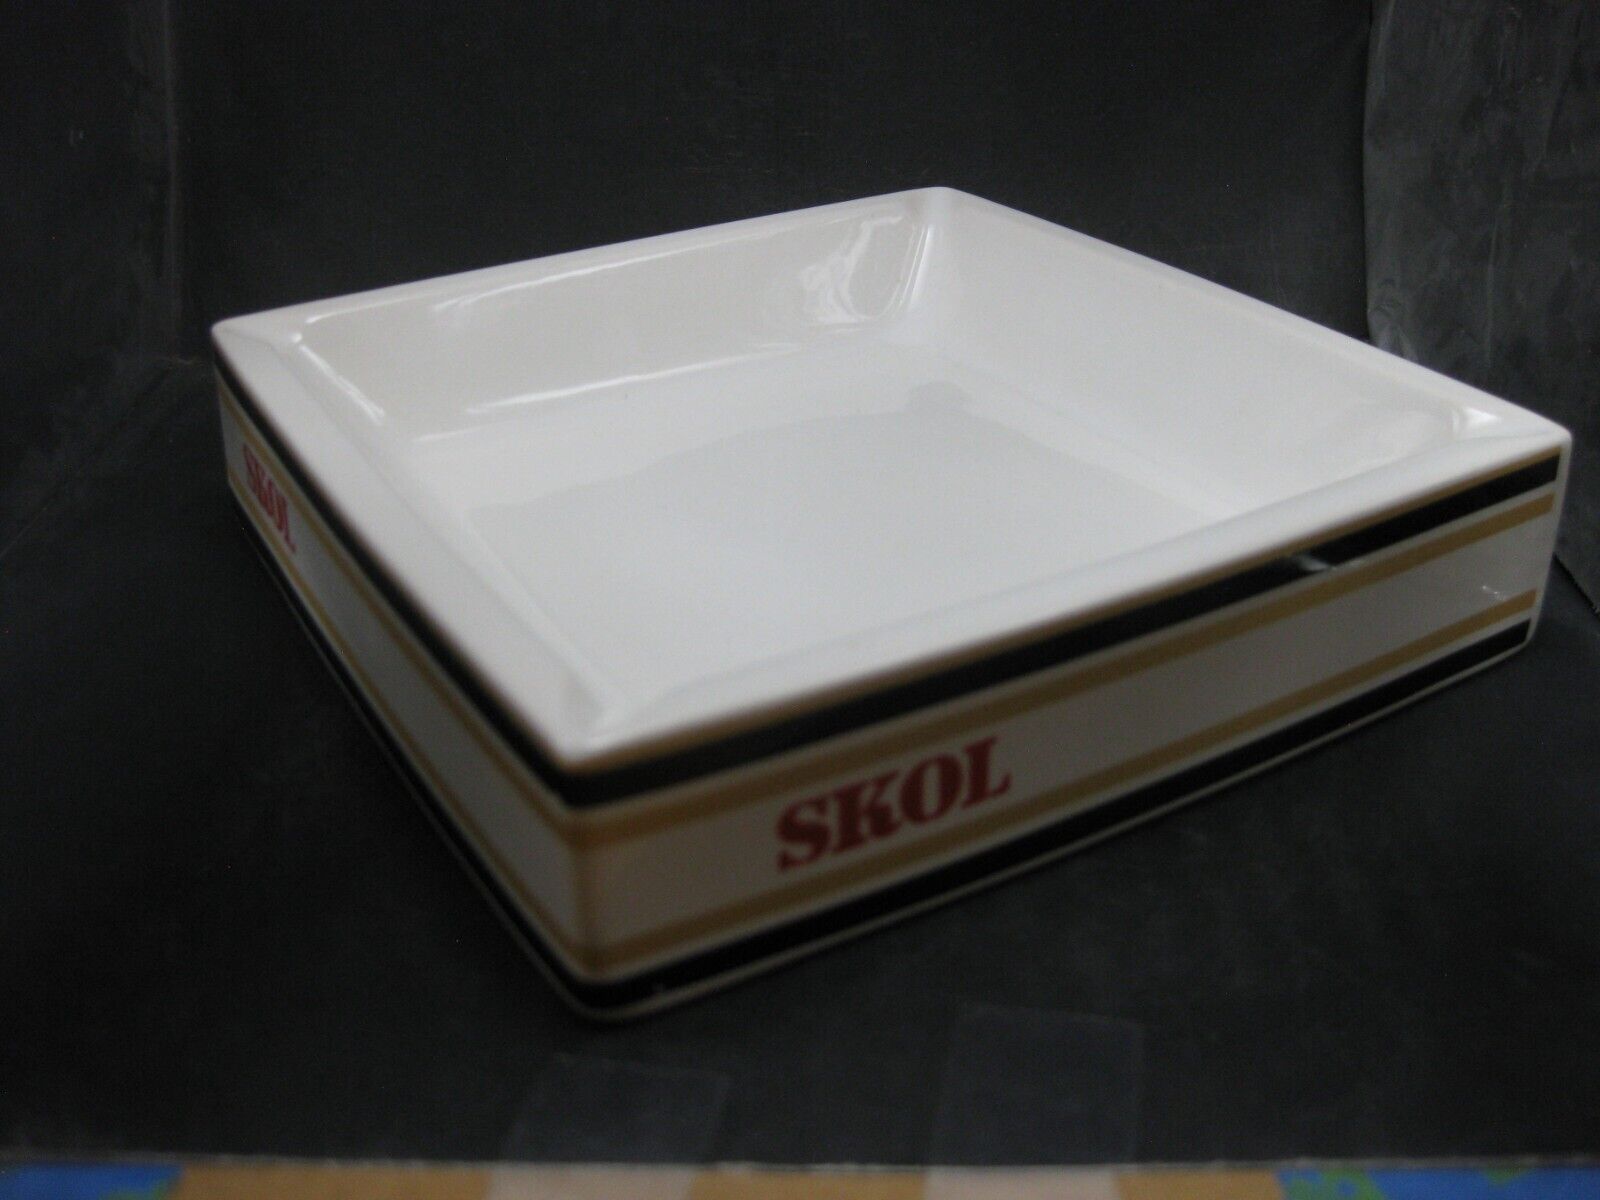 Vintage SKOL Square Ashtray made by WADE ENGLAND - Beautiful